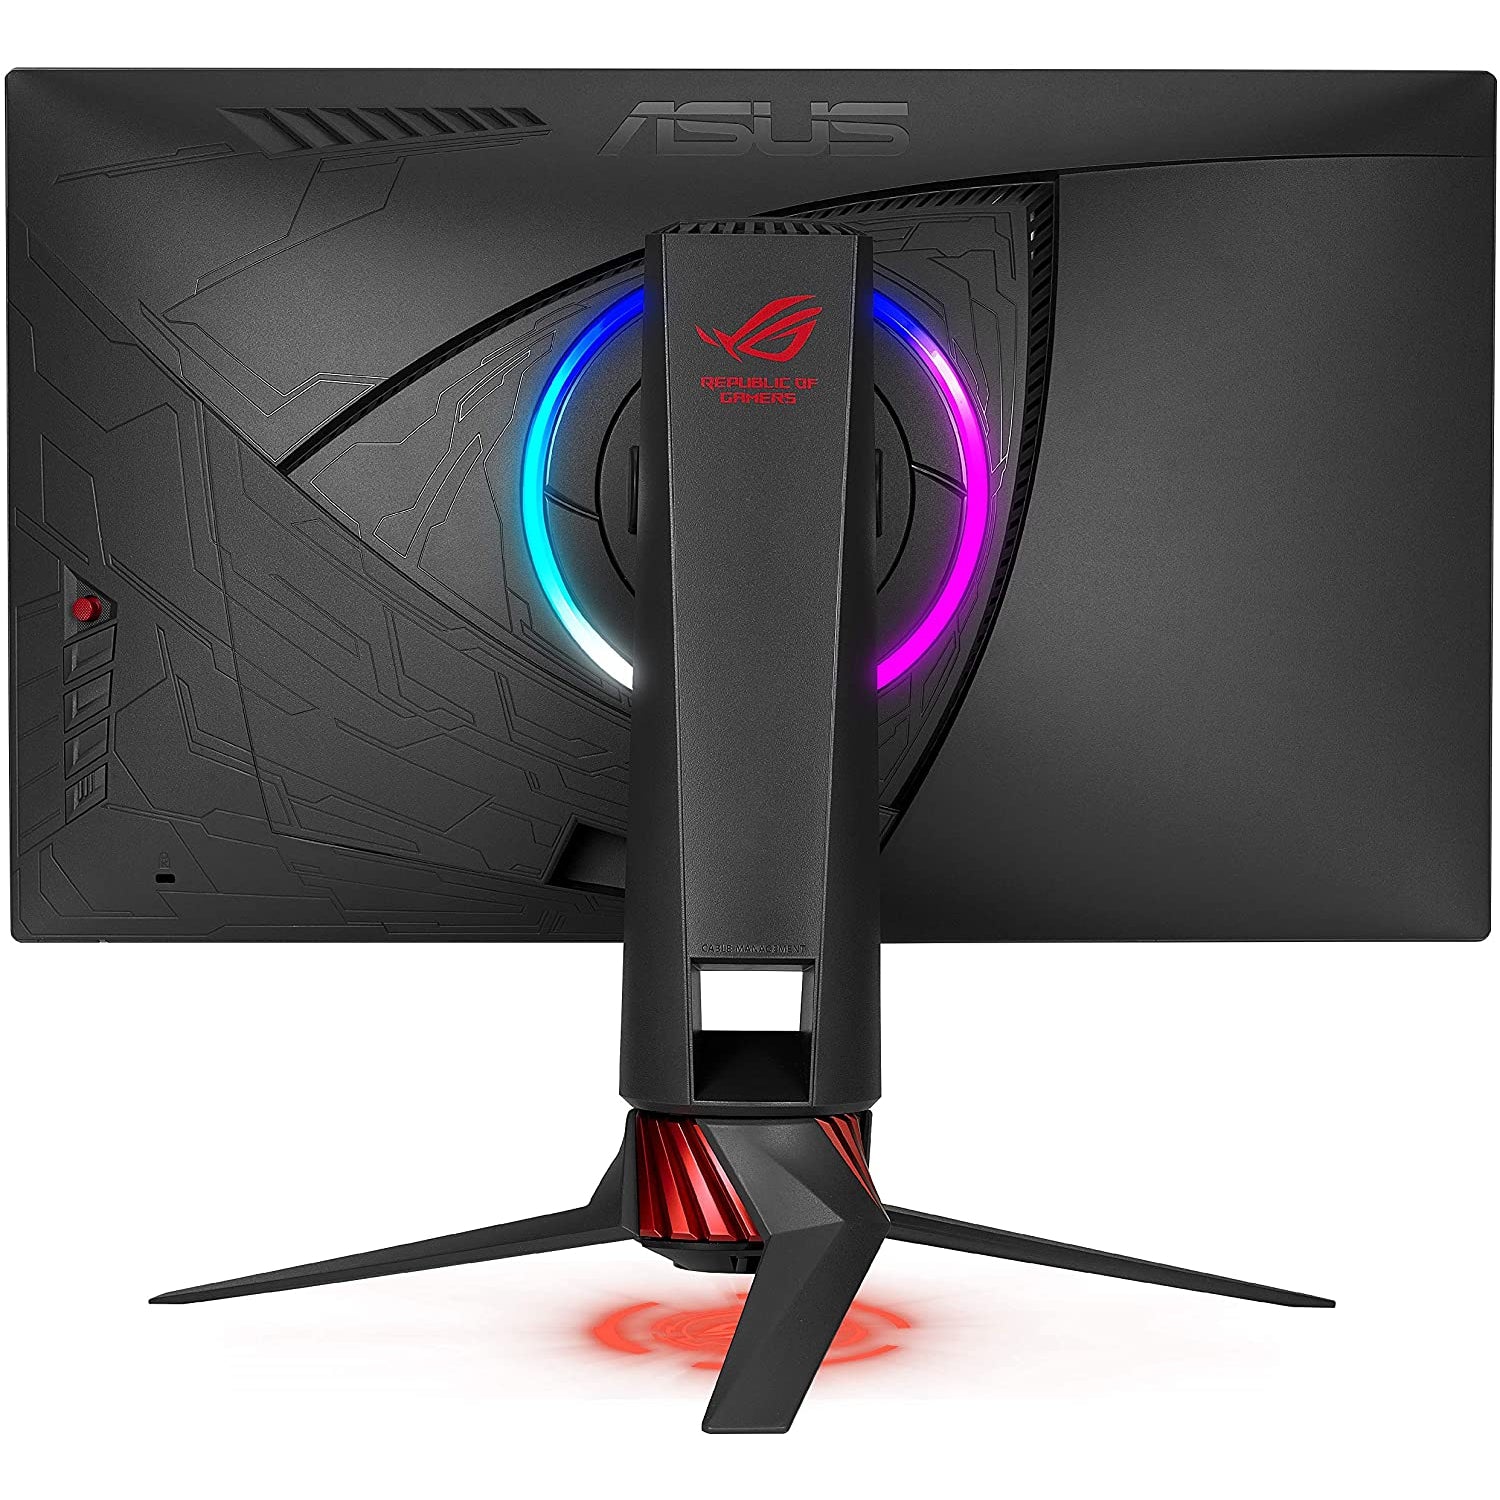 Asus ROG Strix XG258Q 24.5" LED 1ms 240Hz Gaming Monitor *Scratches on Screen*